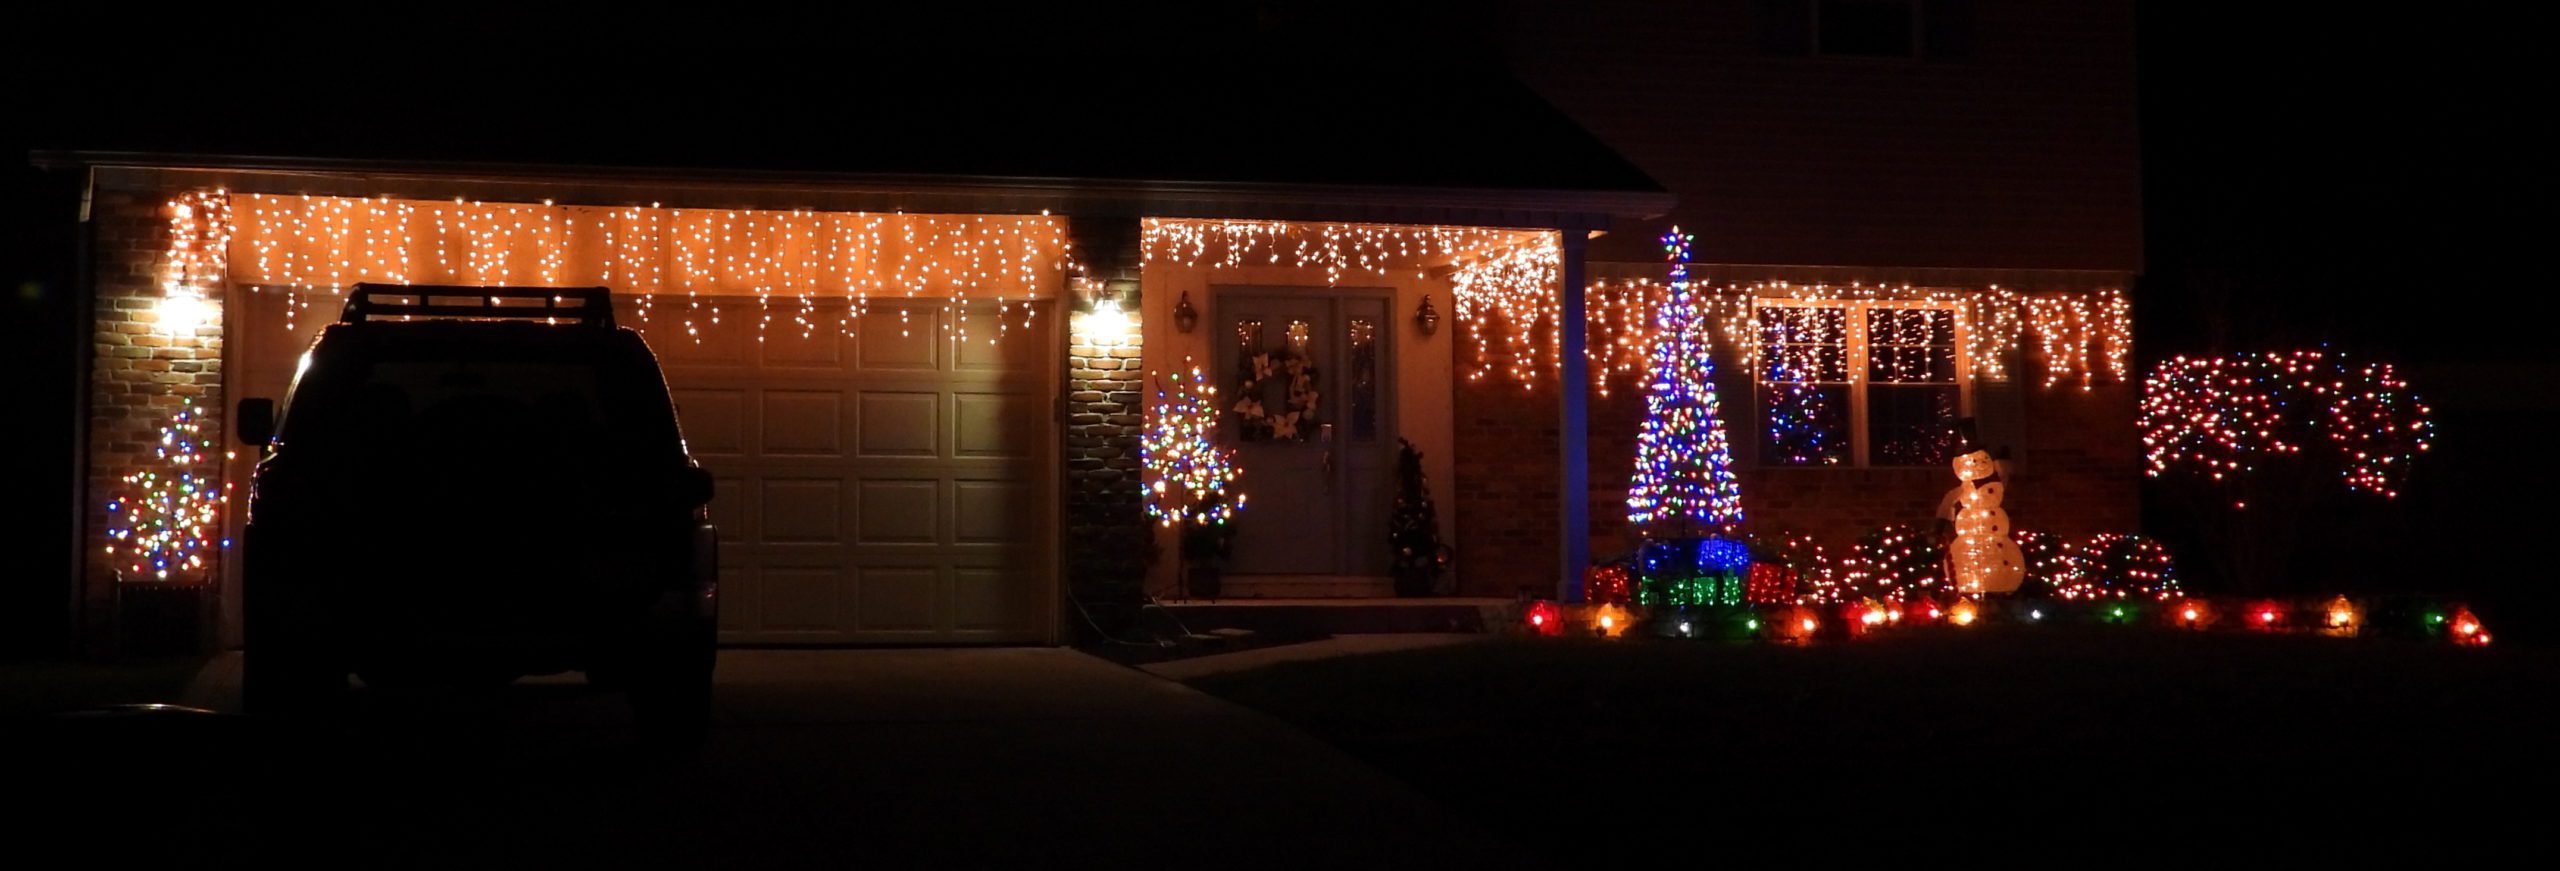 Best Use of White or Colored Lights – 2014 Atterbury Avenue